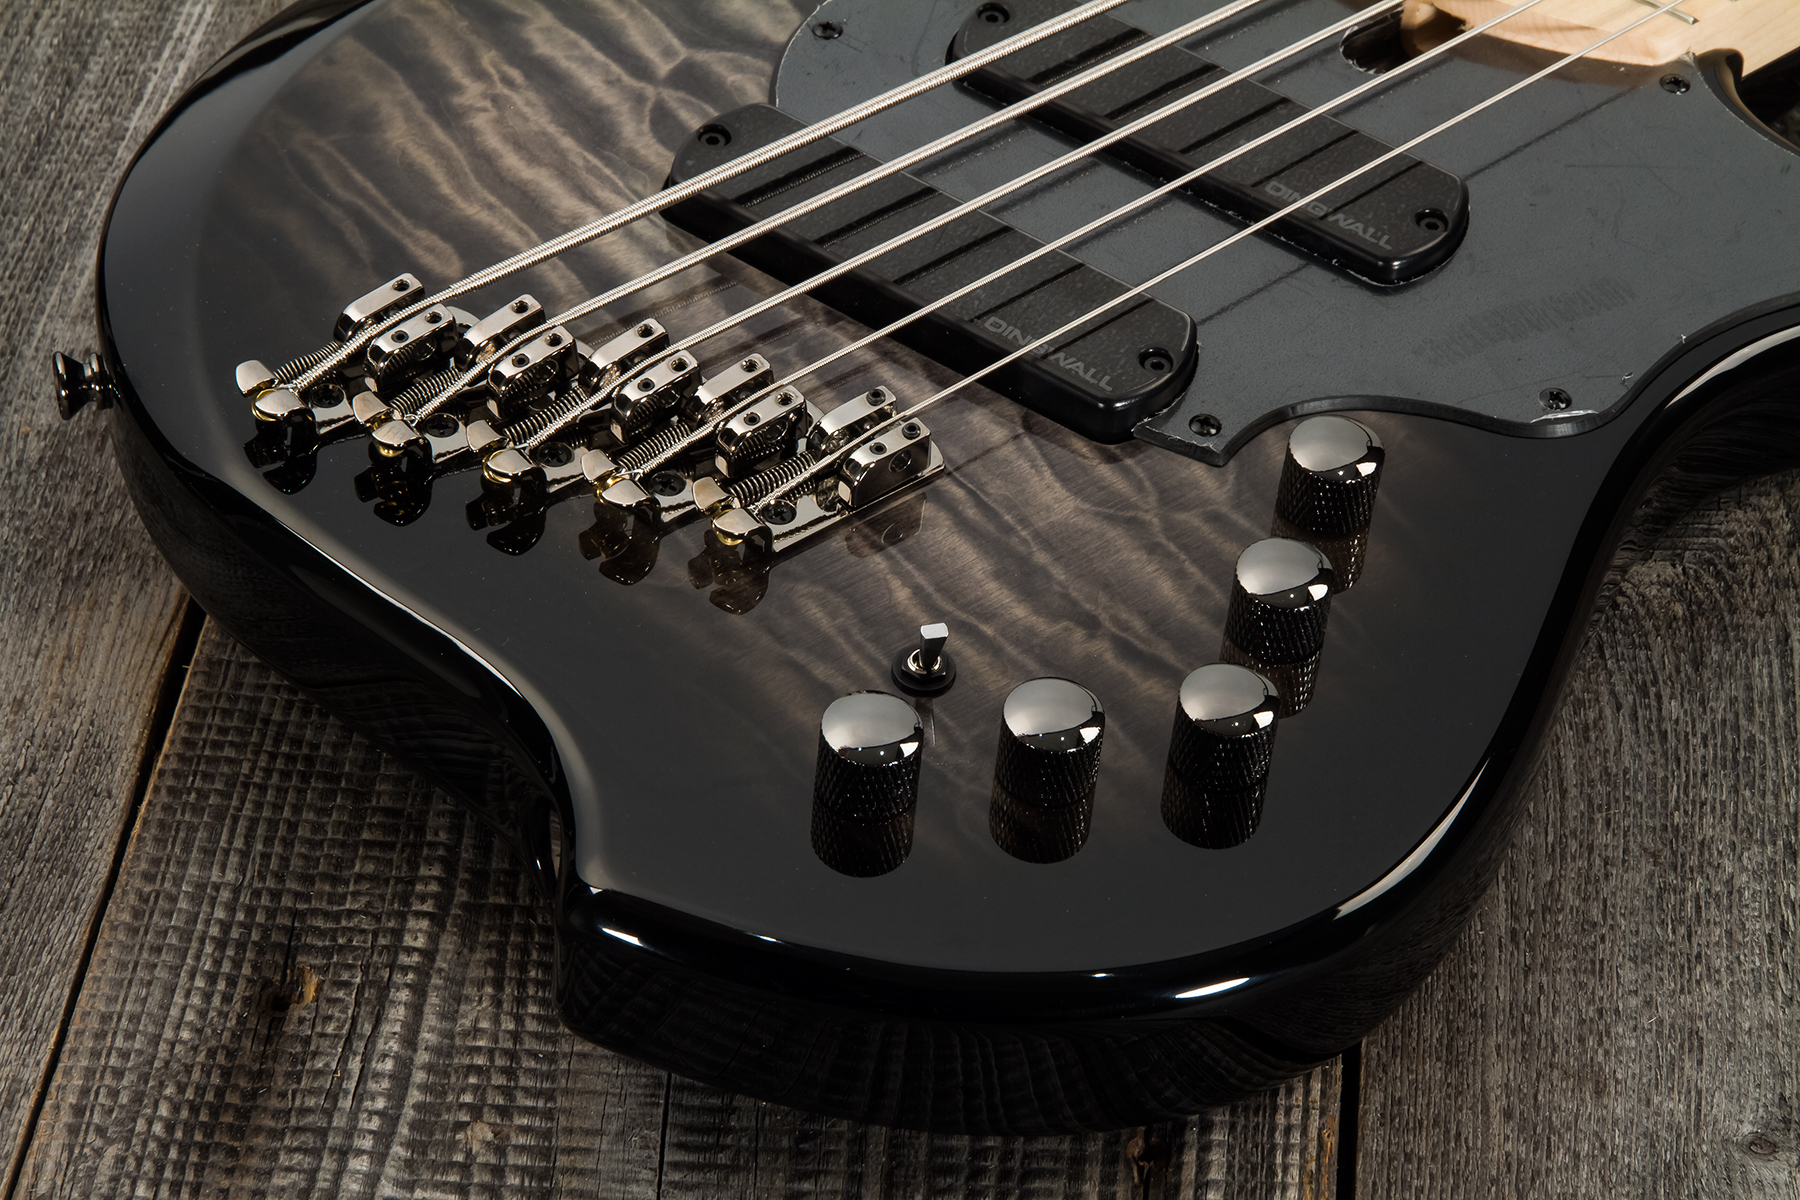 Dingwall Combustion Cb2 5c 2pu Active Mn - 2-tone Blackburst - Solid body electric bass - Variation 4